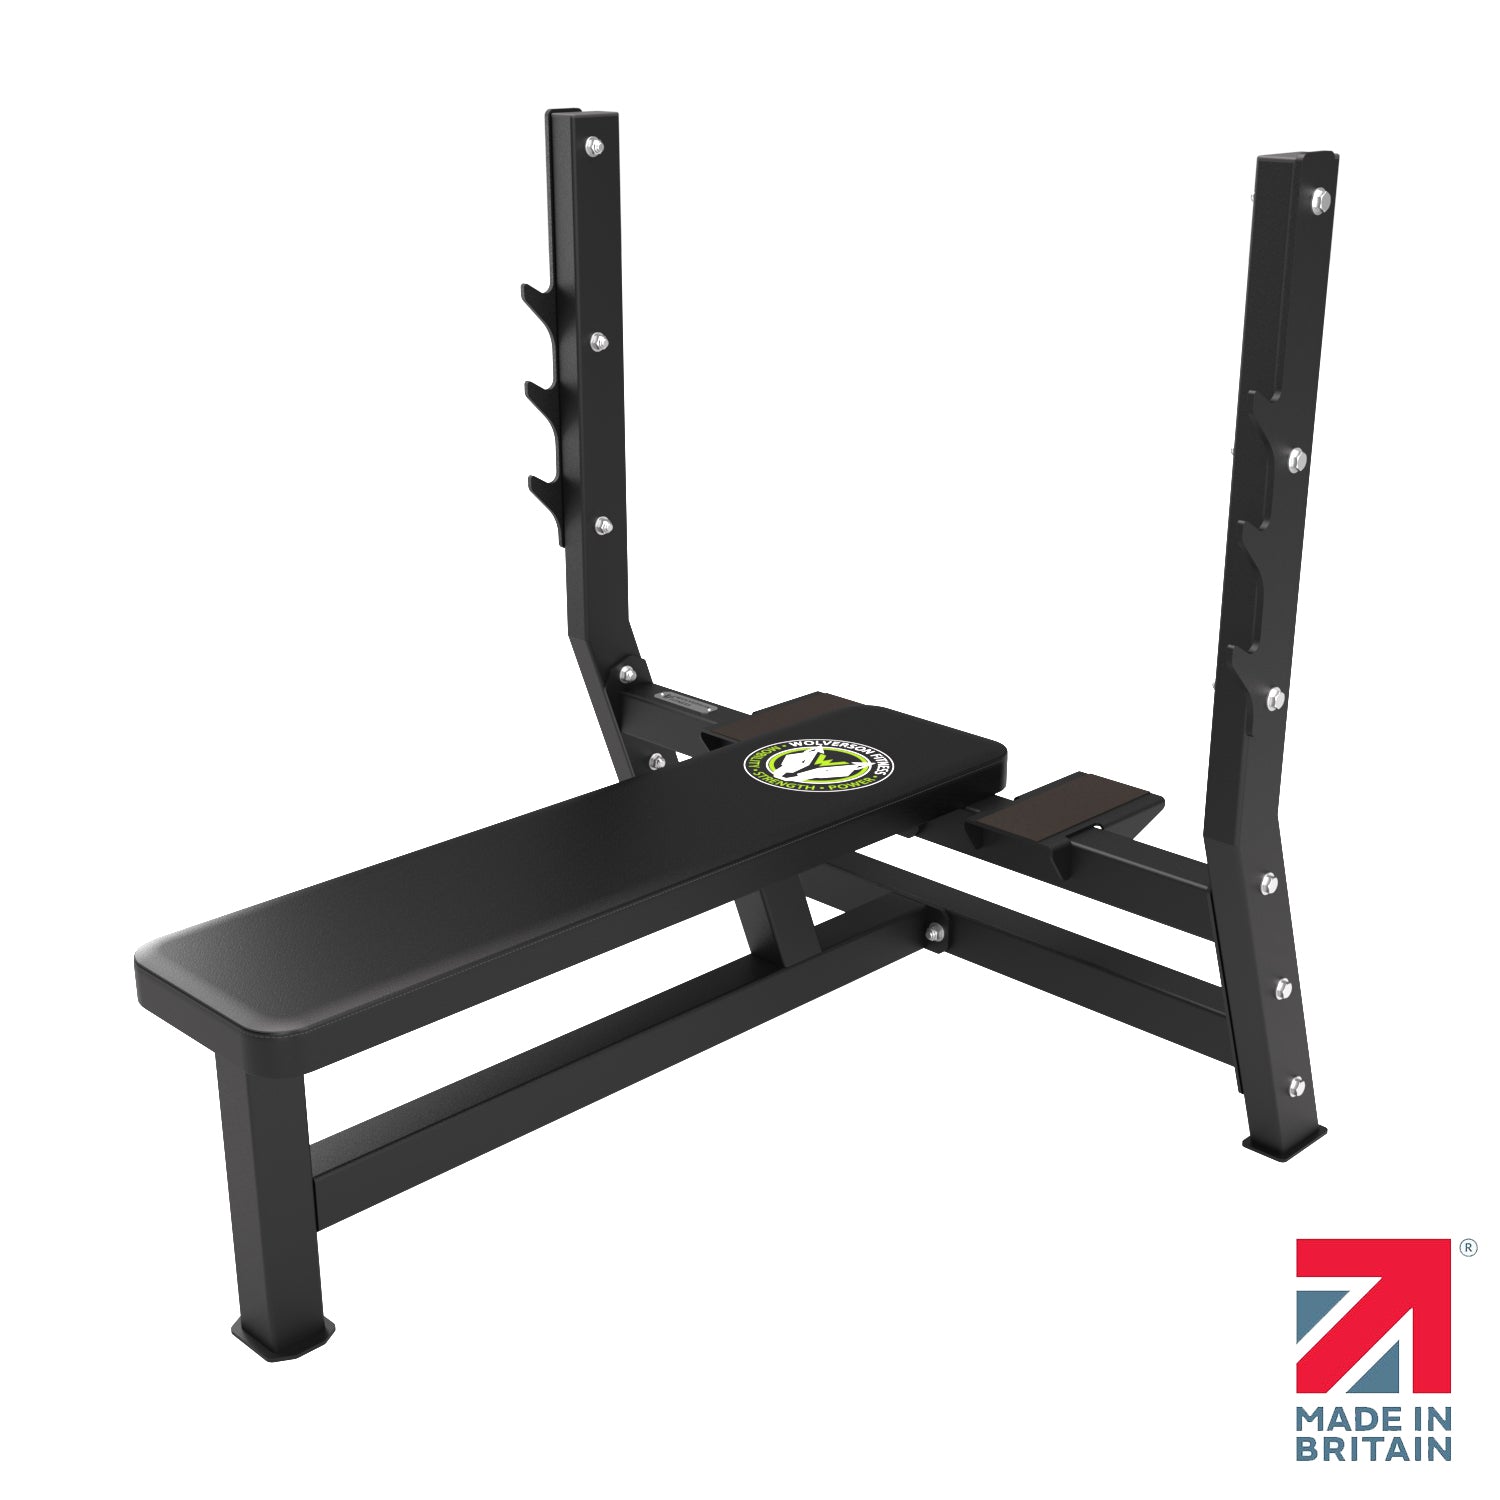 The Colossus Series Olympic Flat Bench